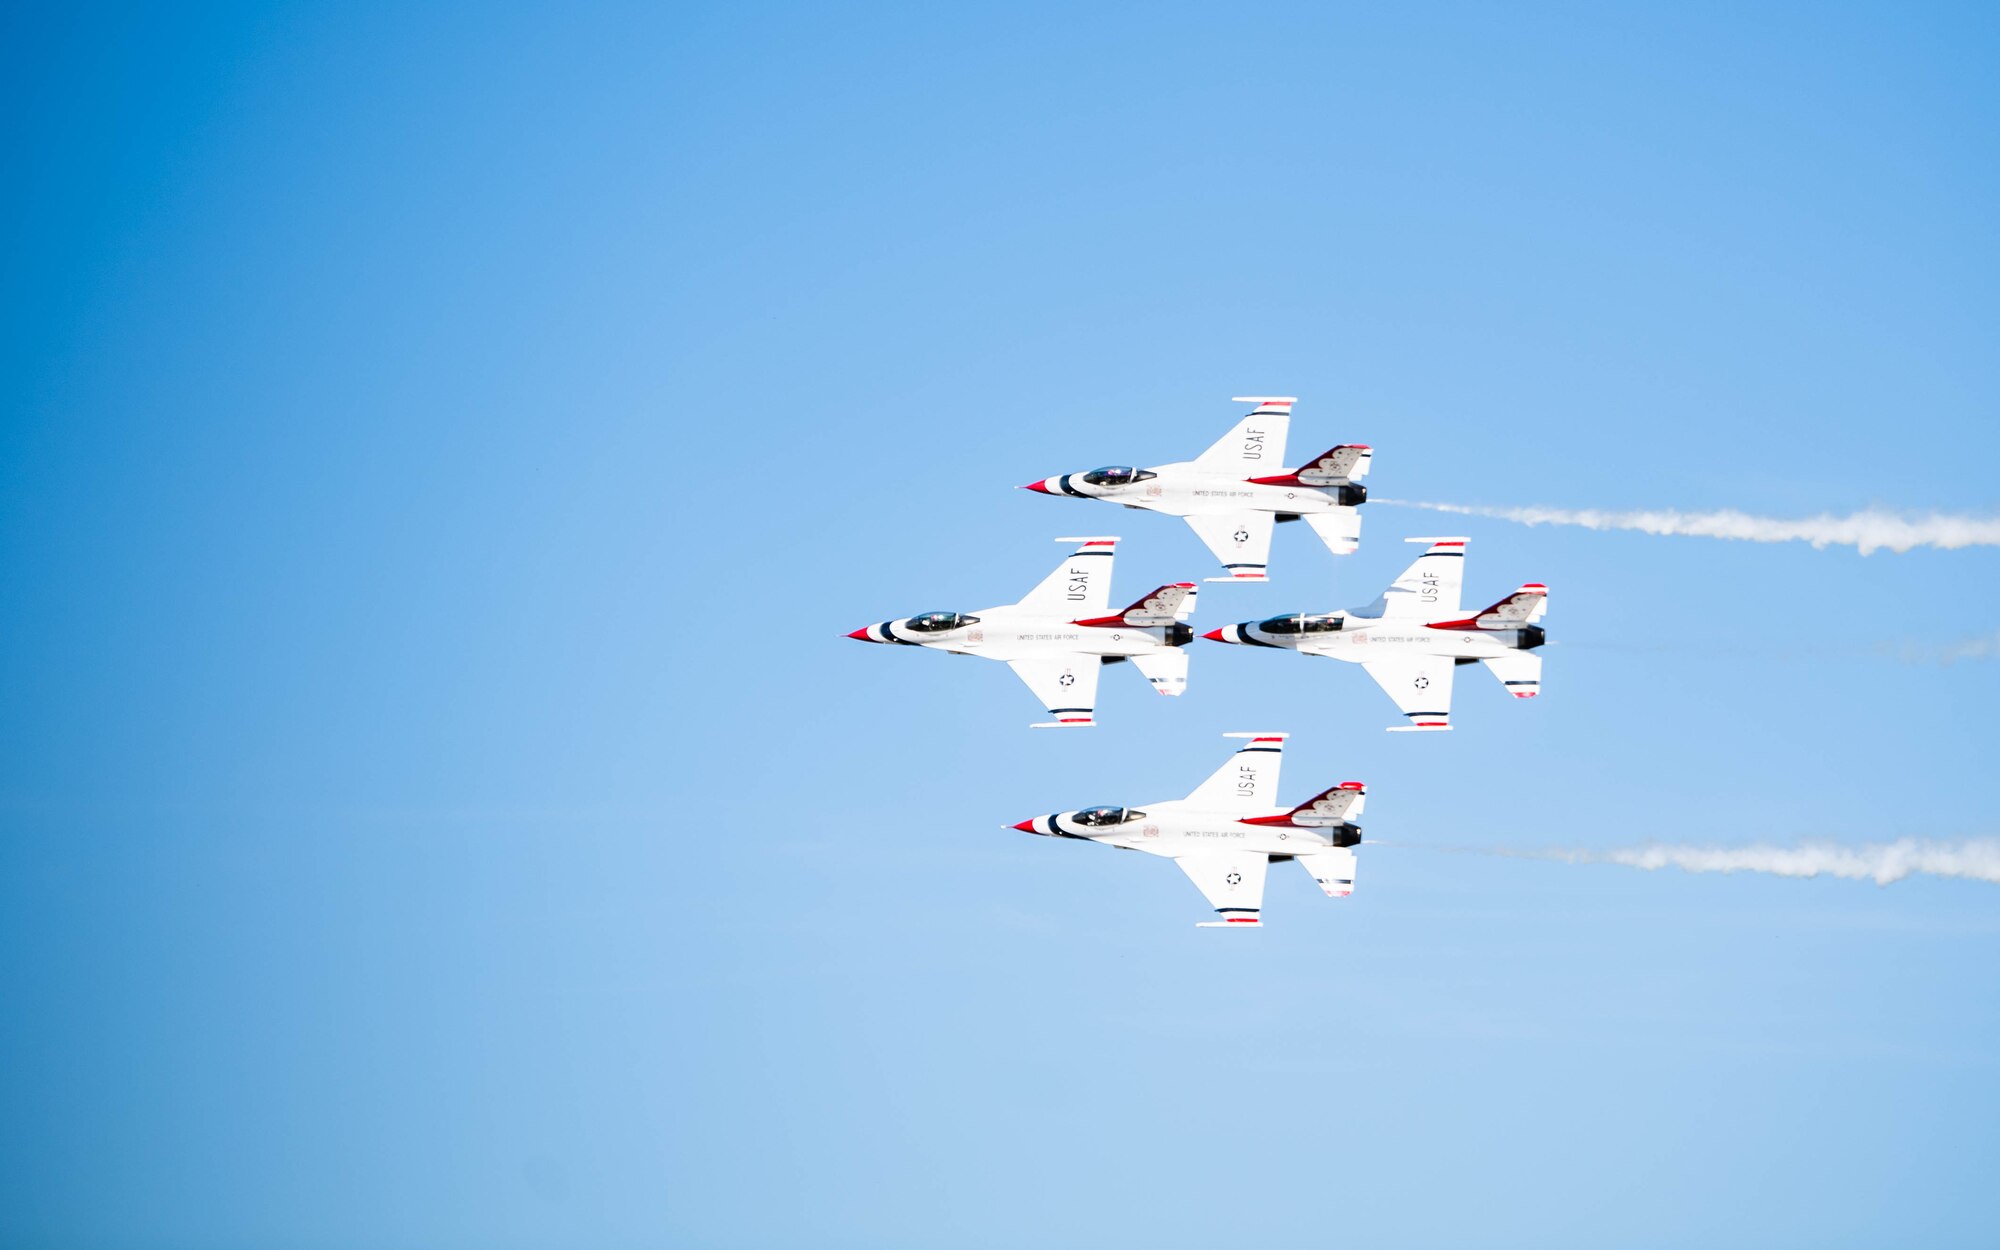 The United States Air Force Air Demonstration Squadron “Thunderbirds'' perform an aerial maneuver at the 2021 Barksdale Air Force Base Defenders of Liberty Air Show at Barksdale Air Force Base, Louisiana, May 7, 2021. Barksdale's Air Show showcased performances from the Thunderbirds, F-22 Raptor Demonstration Team and a host of additional acts. (U.S. Air Force photo by Senior Airman Jacob B. Wrightsman)